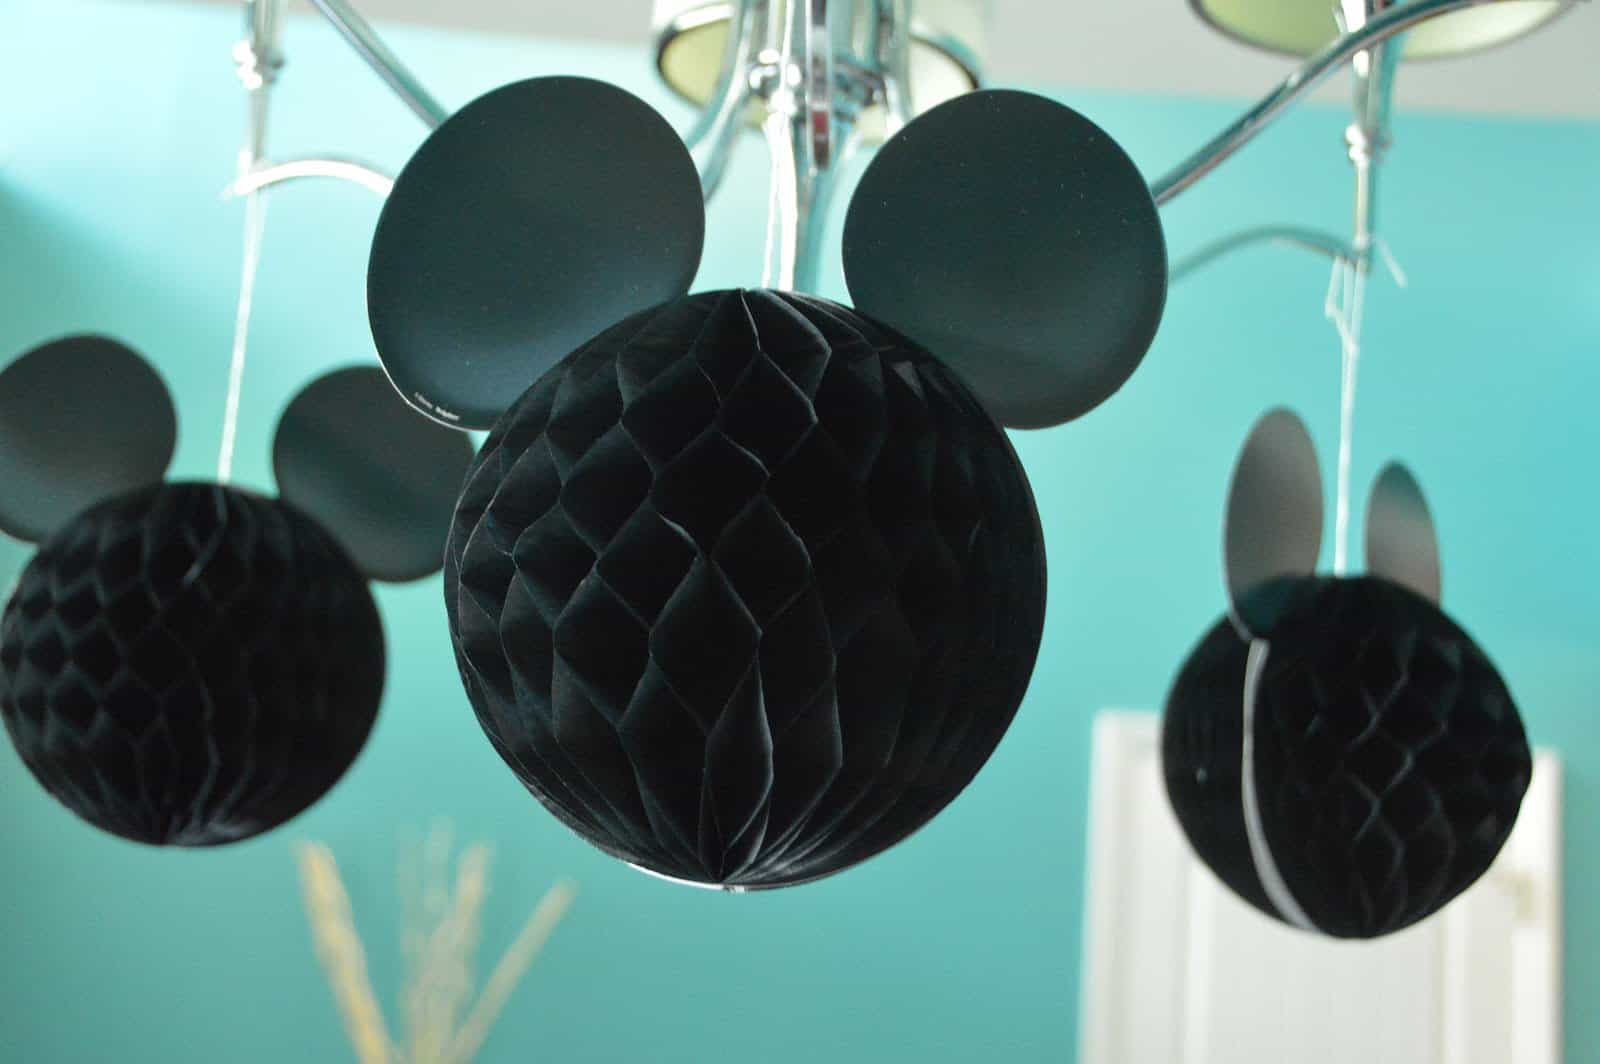 mickey and minnie party ideas